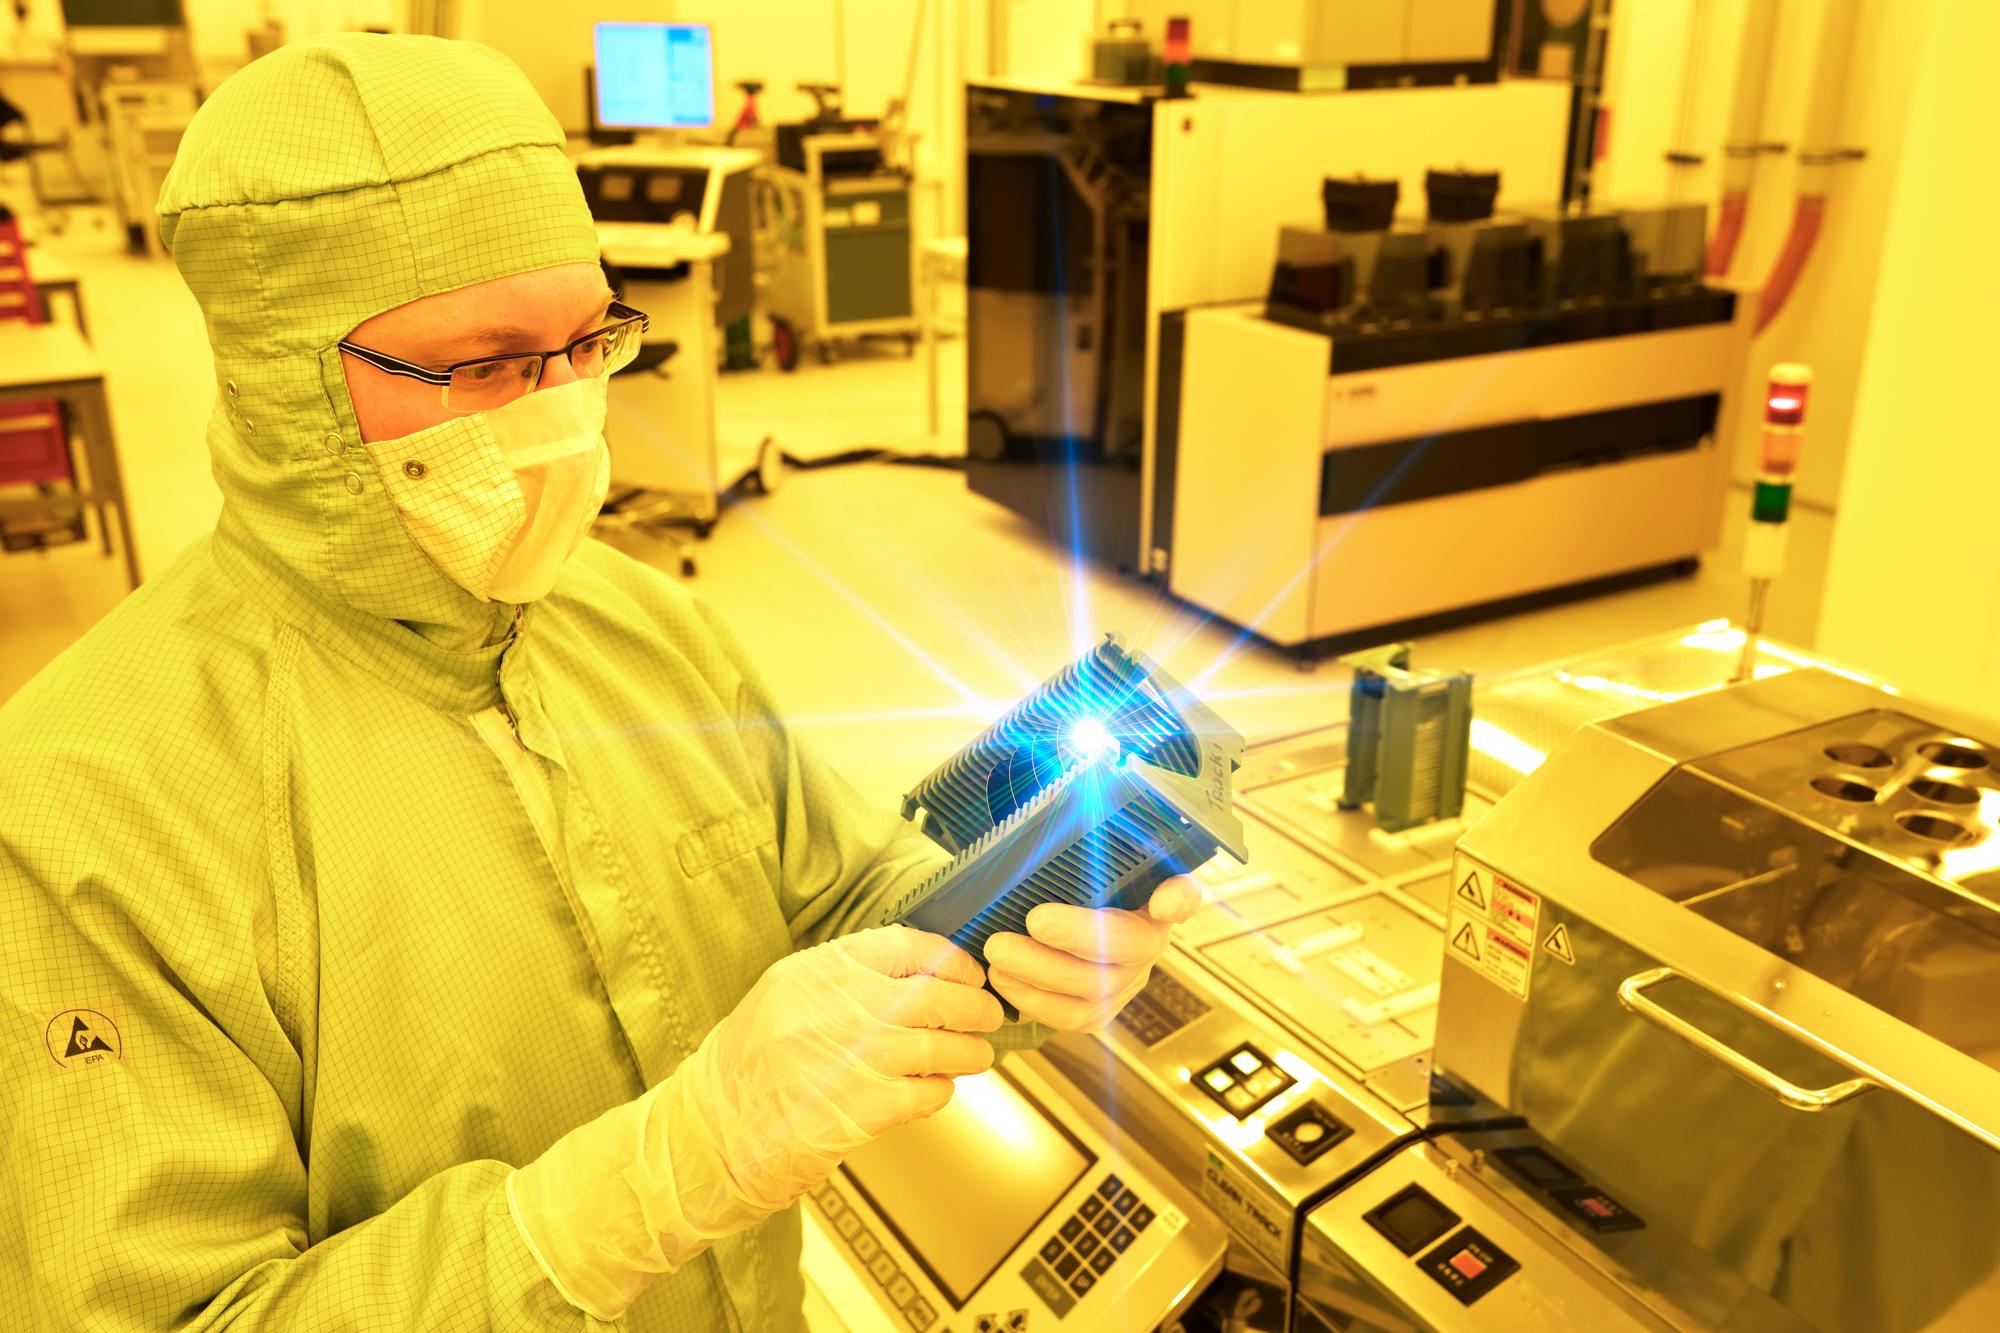 SMART Photonics combines top technology with a market need